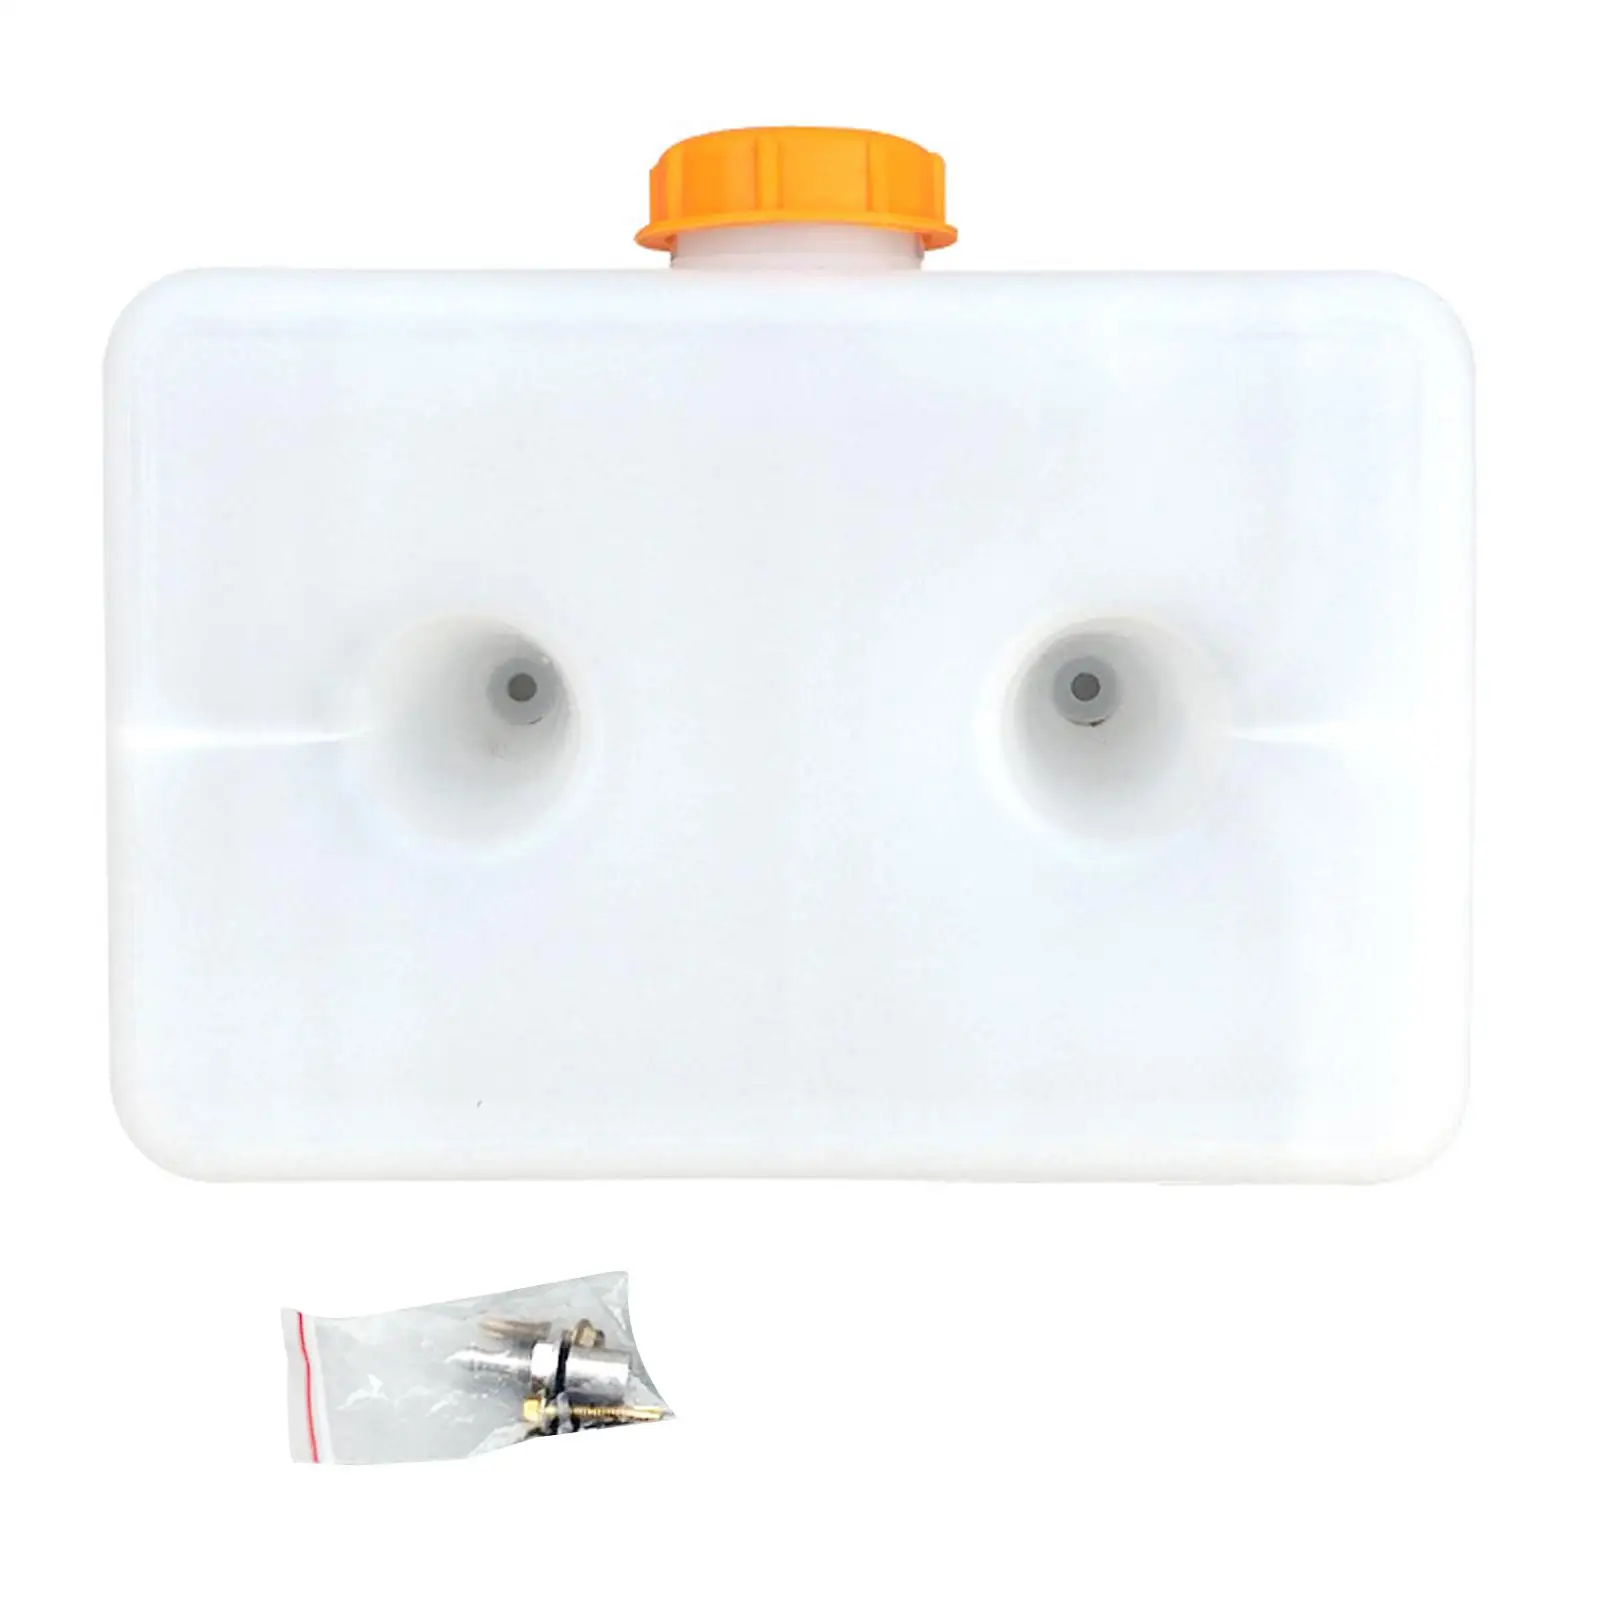 Gas Fuel Storage Tank 2 Holes Plastic for Car Heater Durable for Car SUV Truck Oil Gasoline Tank